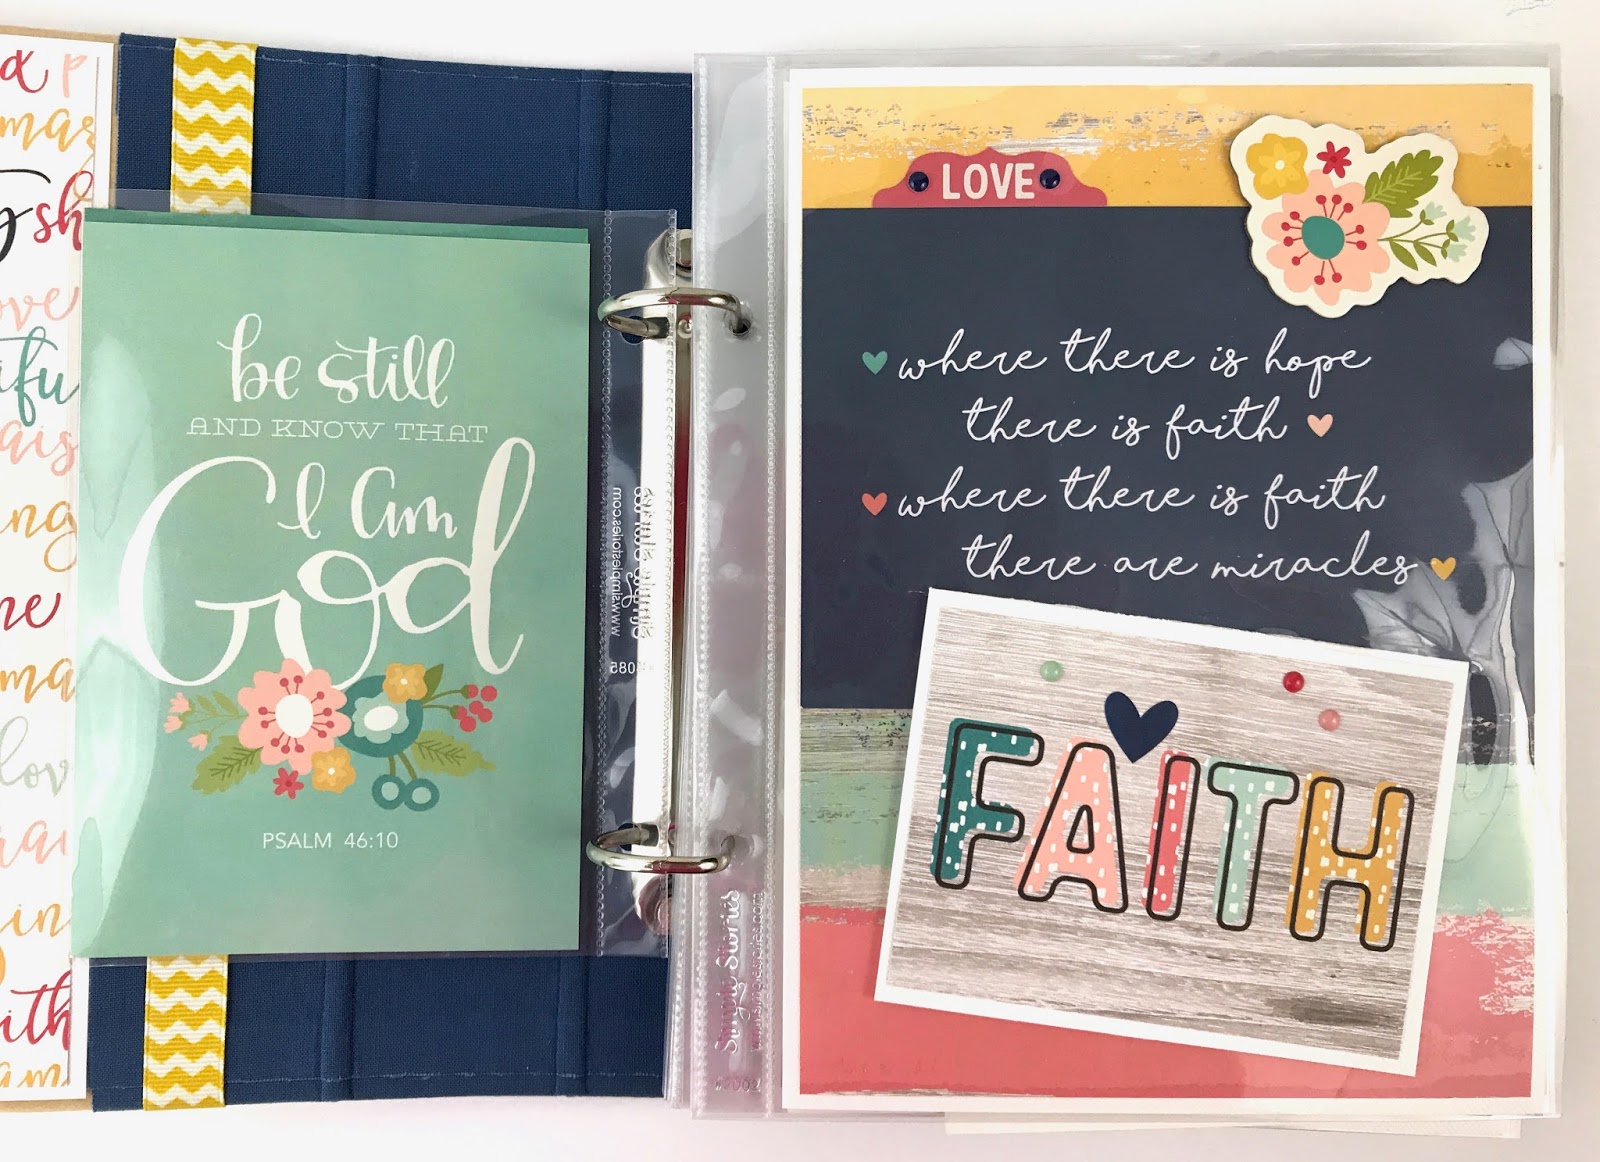 Artsy Albums Scrapbook Album and Page Layout Kits by Traci Penrod: Faith  Scrapbook with Simple Stories Faith